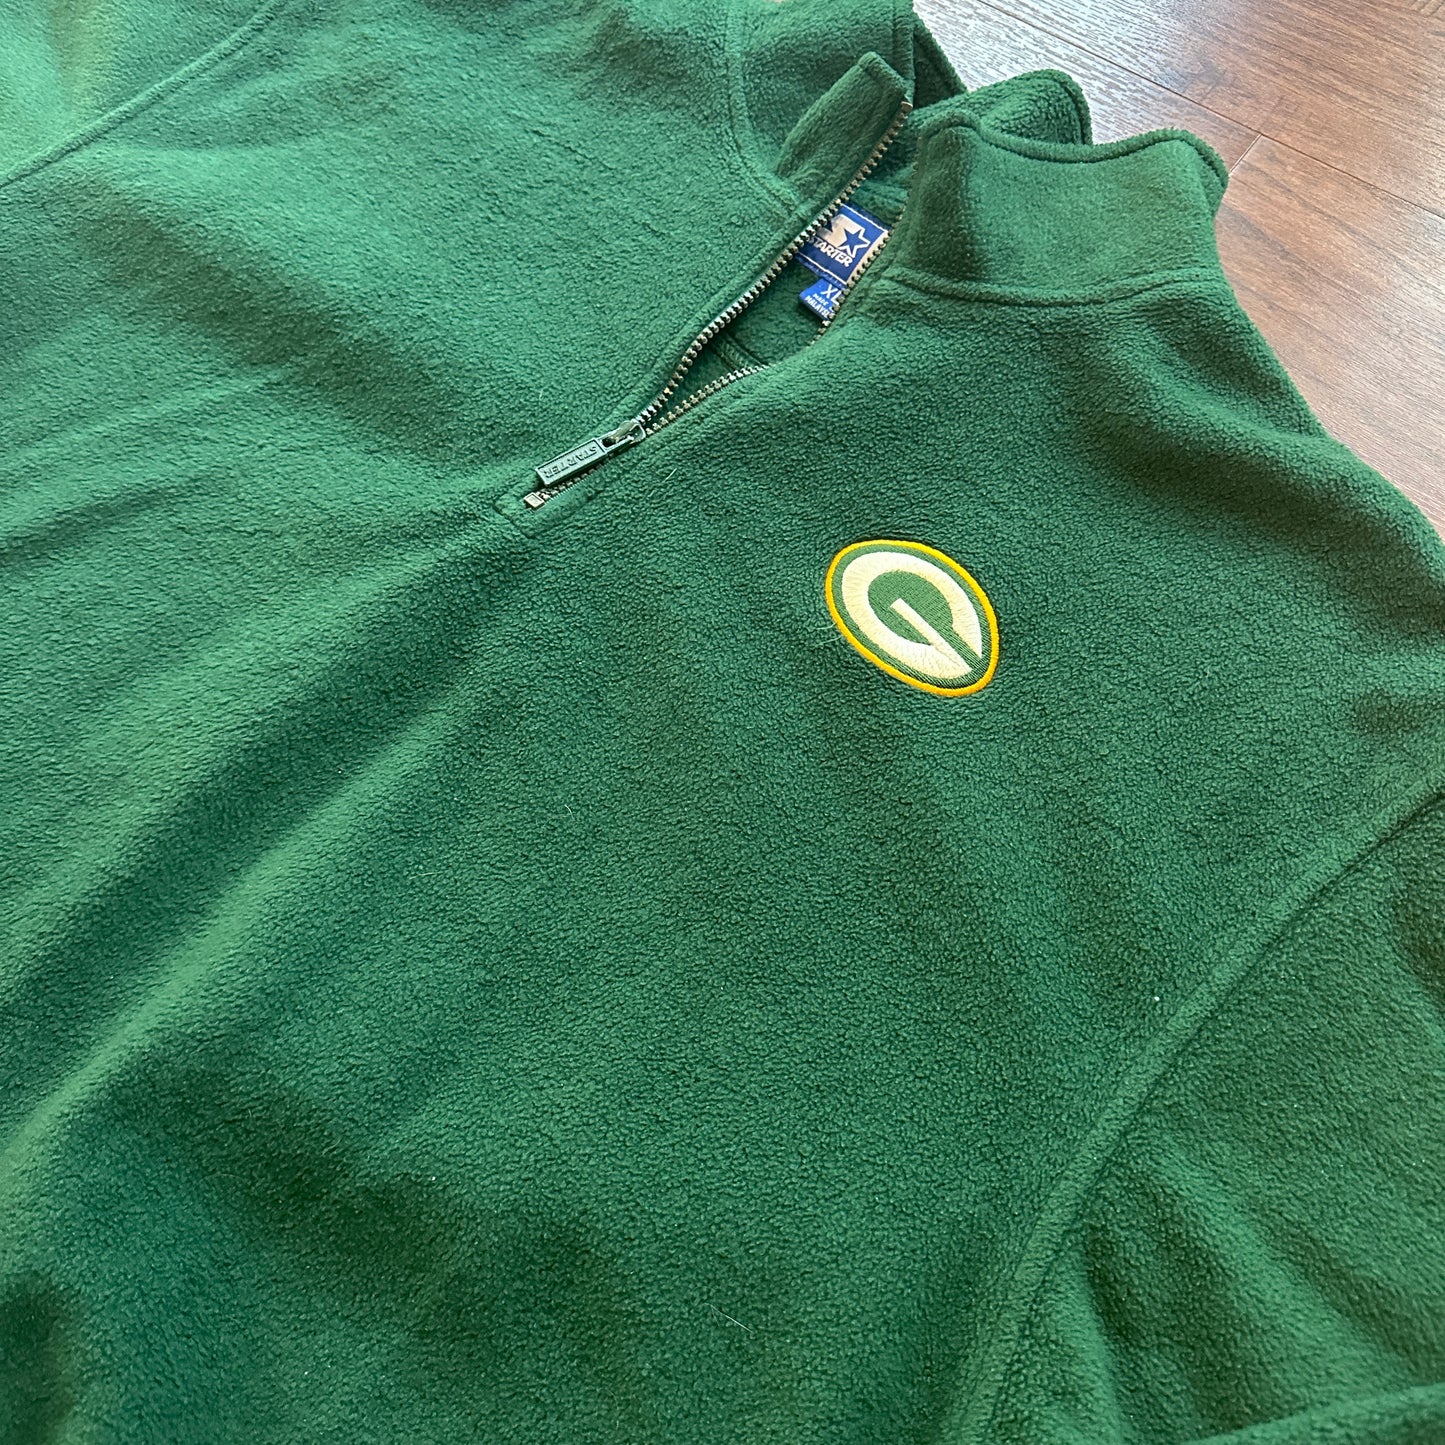 *VINTAGE* Greenbay Packers Pullover (FITS X-LARGE)